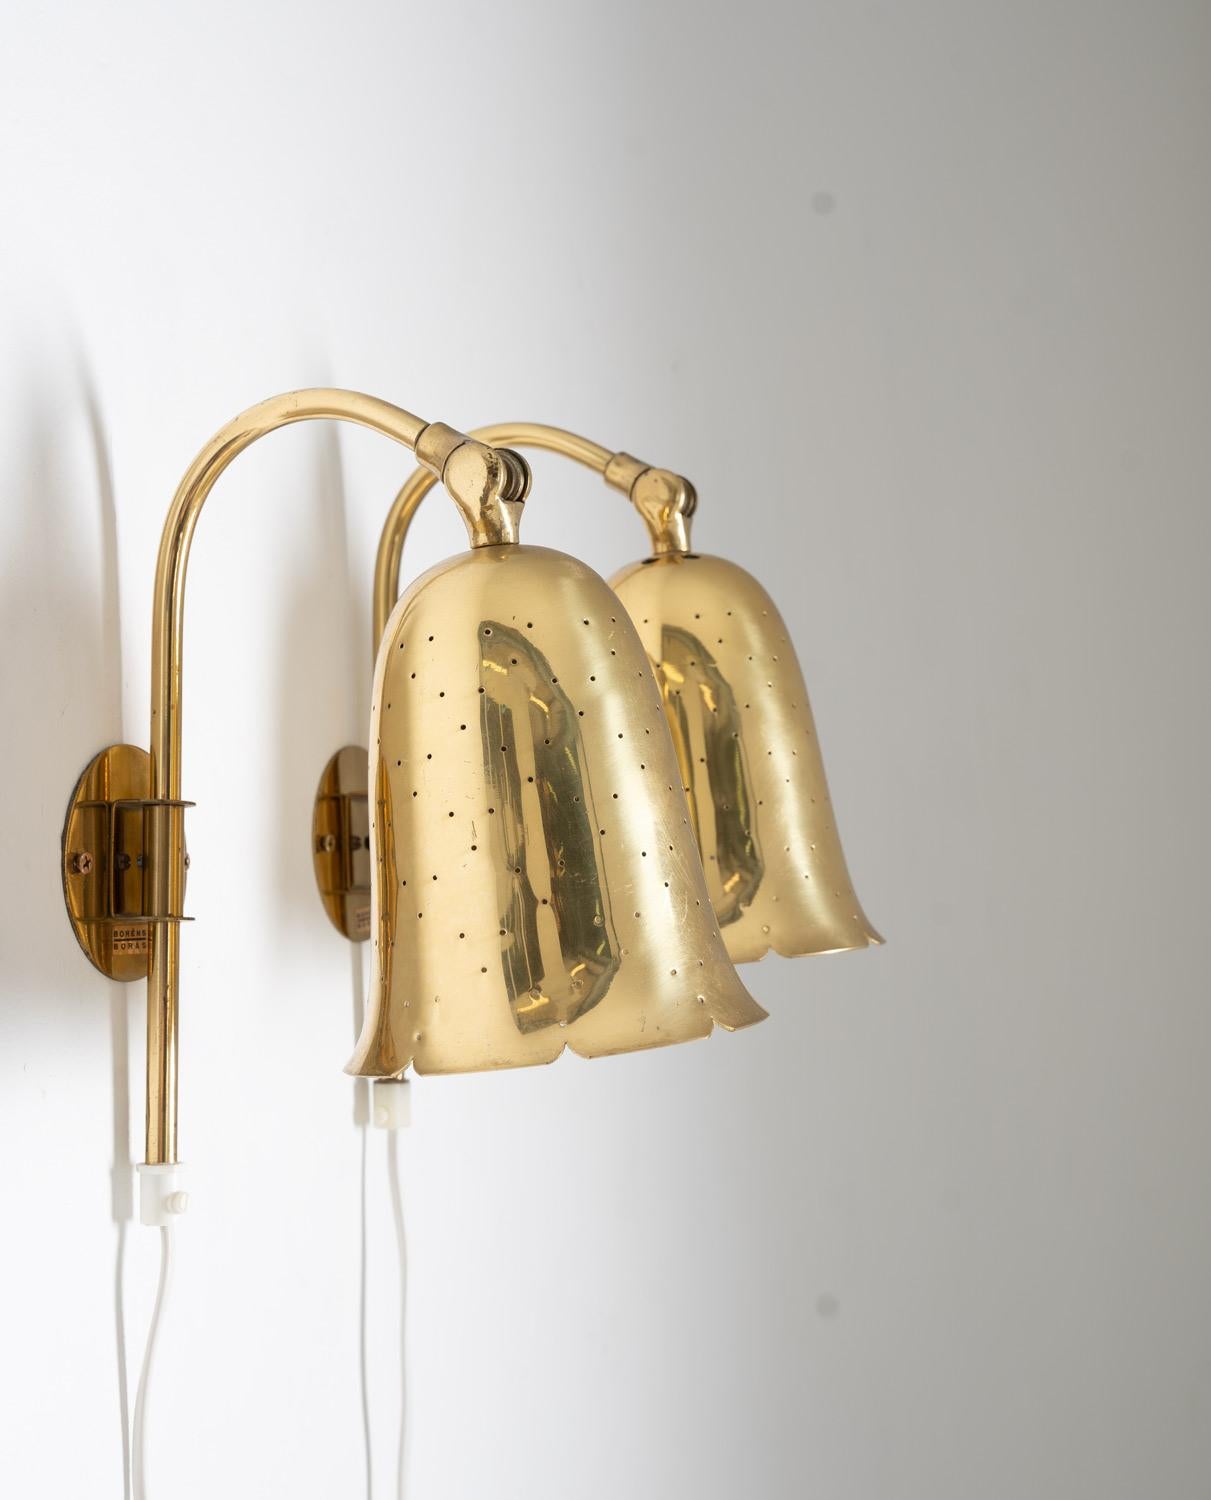 This charming pair of Boréns wall lamps was produced in Sweden during the 1960s. The lamps have a distinctive design, featuring brass clock-shaped shades with perforations. One notable feature is their adjustable angle, allowing you to direct the